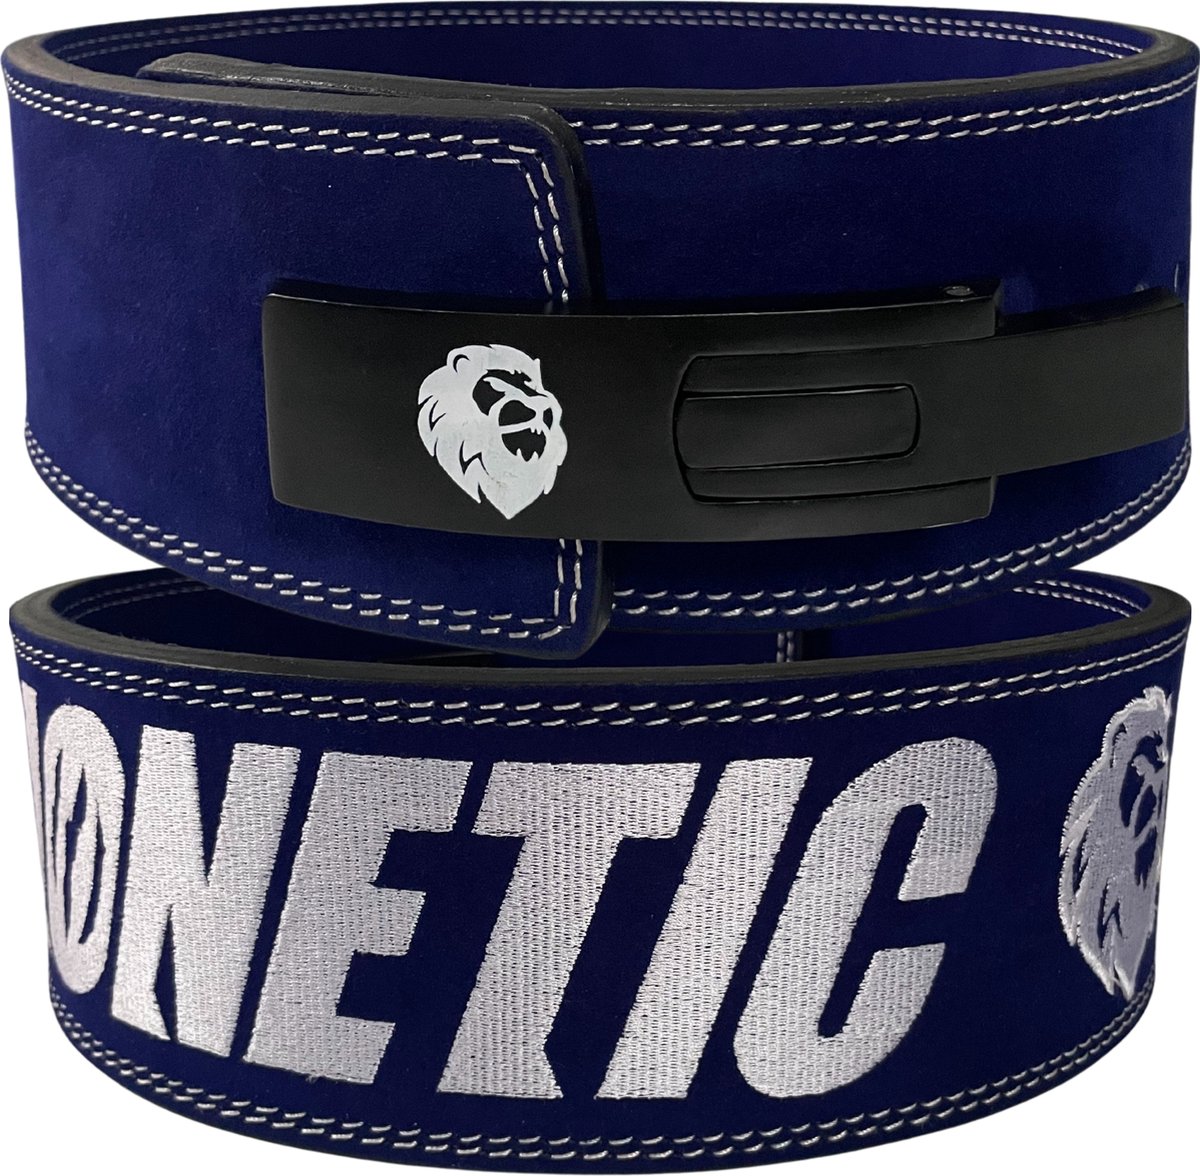 Lionetic LIMITED EDITION Powerlifting Lever Belt - Lifting Belt - Powerliftig Riem - Clip Sluiting - Lever Belt - Powerlifting/Bodybuilding - Krachttraining Accessoires - 10mm – Lionetic Essentials Midnight Blue – L